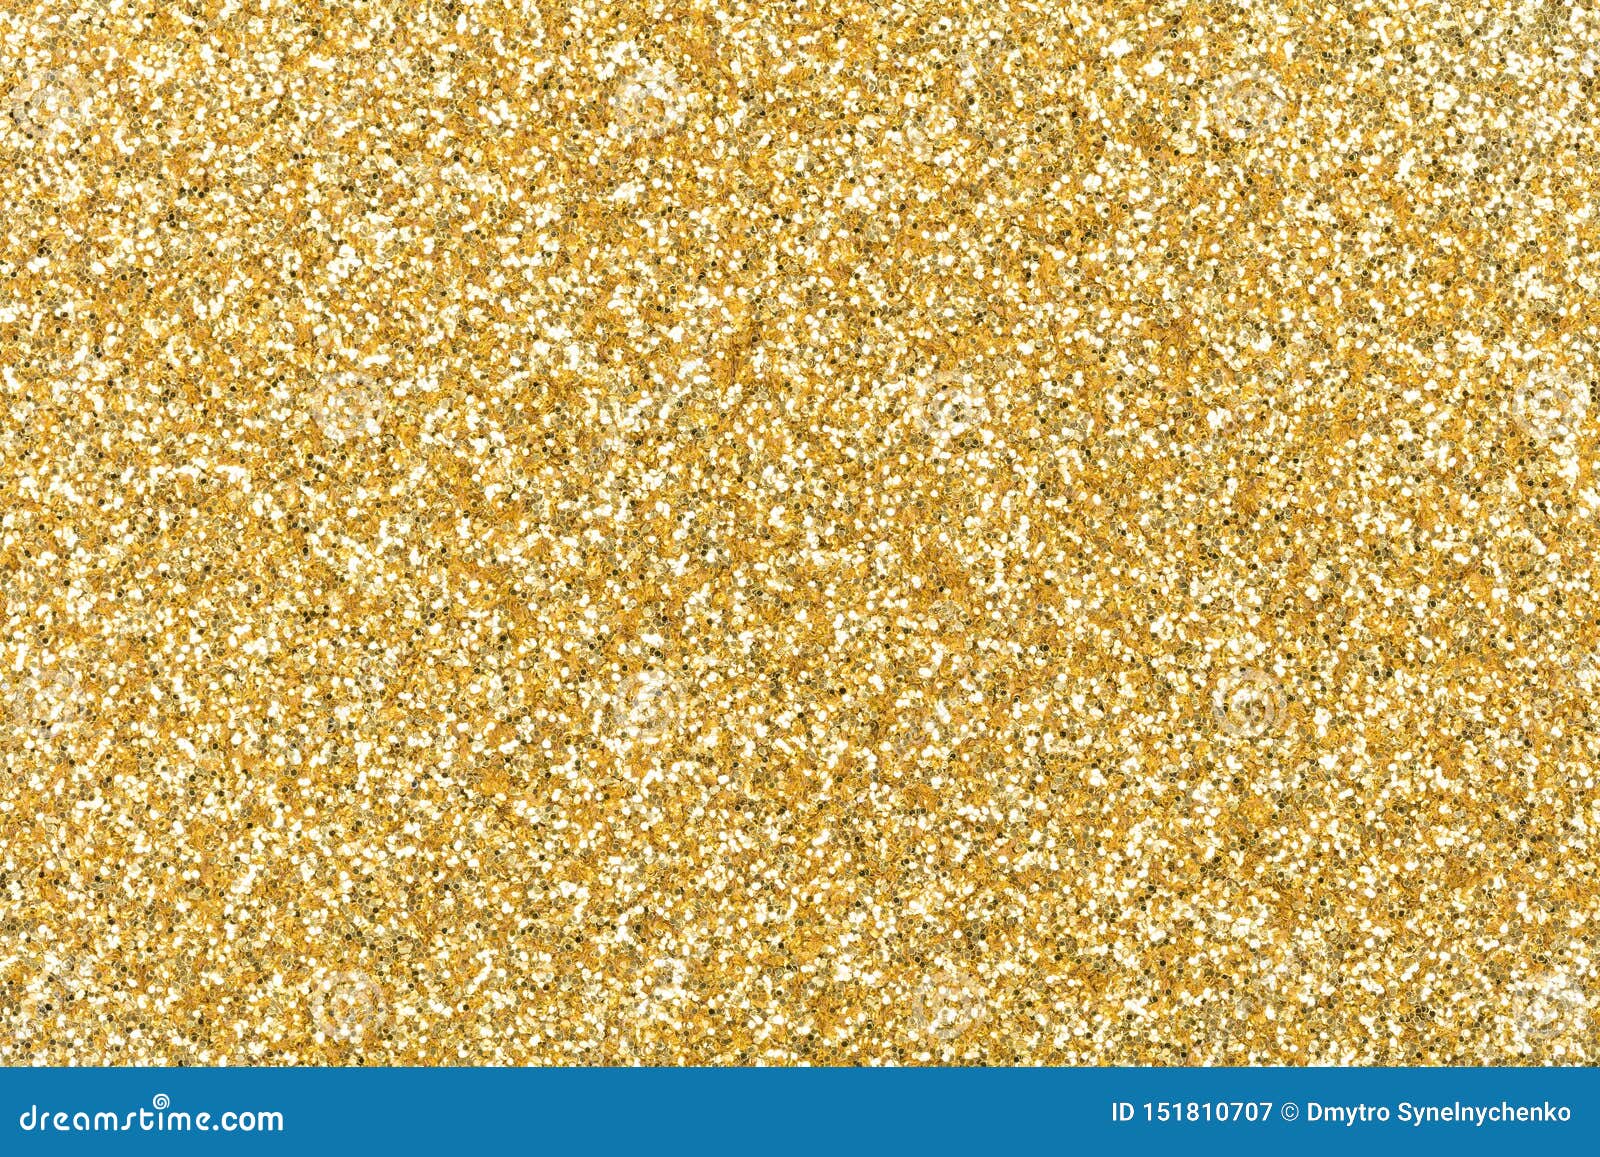 Shiny Gold Glitter Background for Your Creative Design Work. Stock Image -  Image of colorful, golden: 151810707